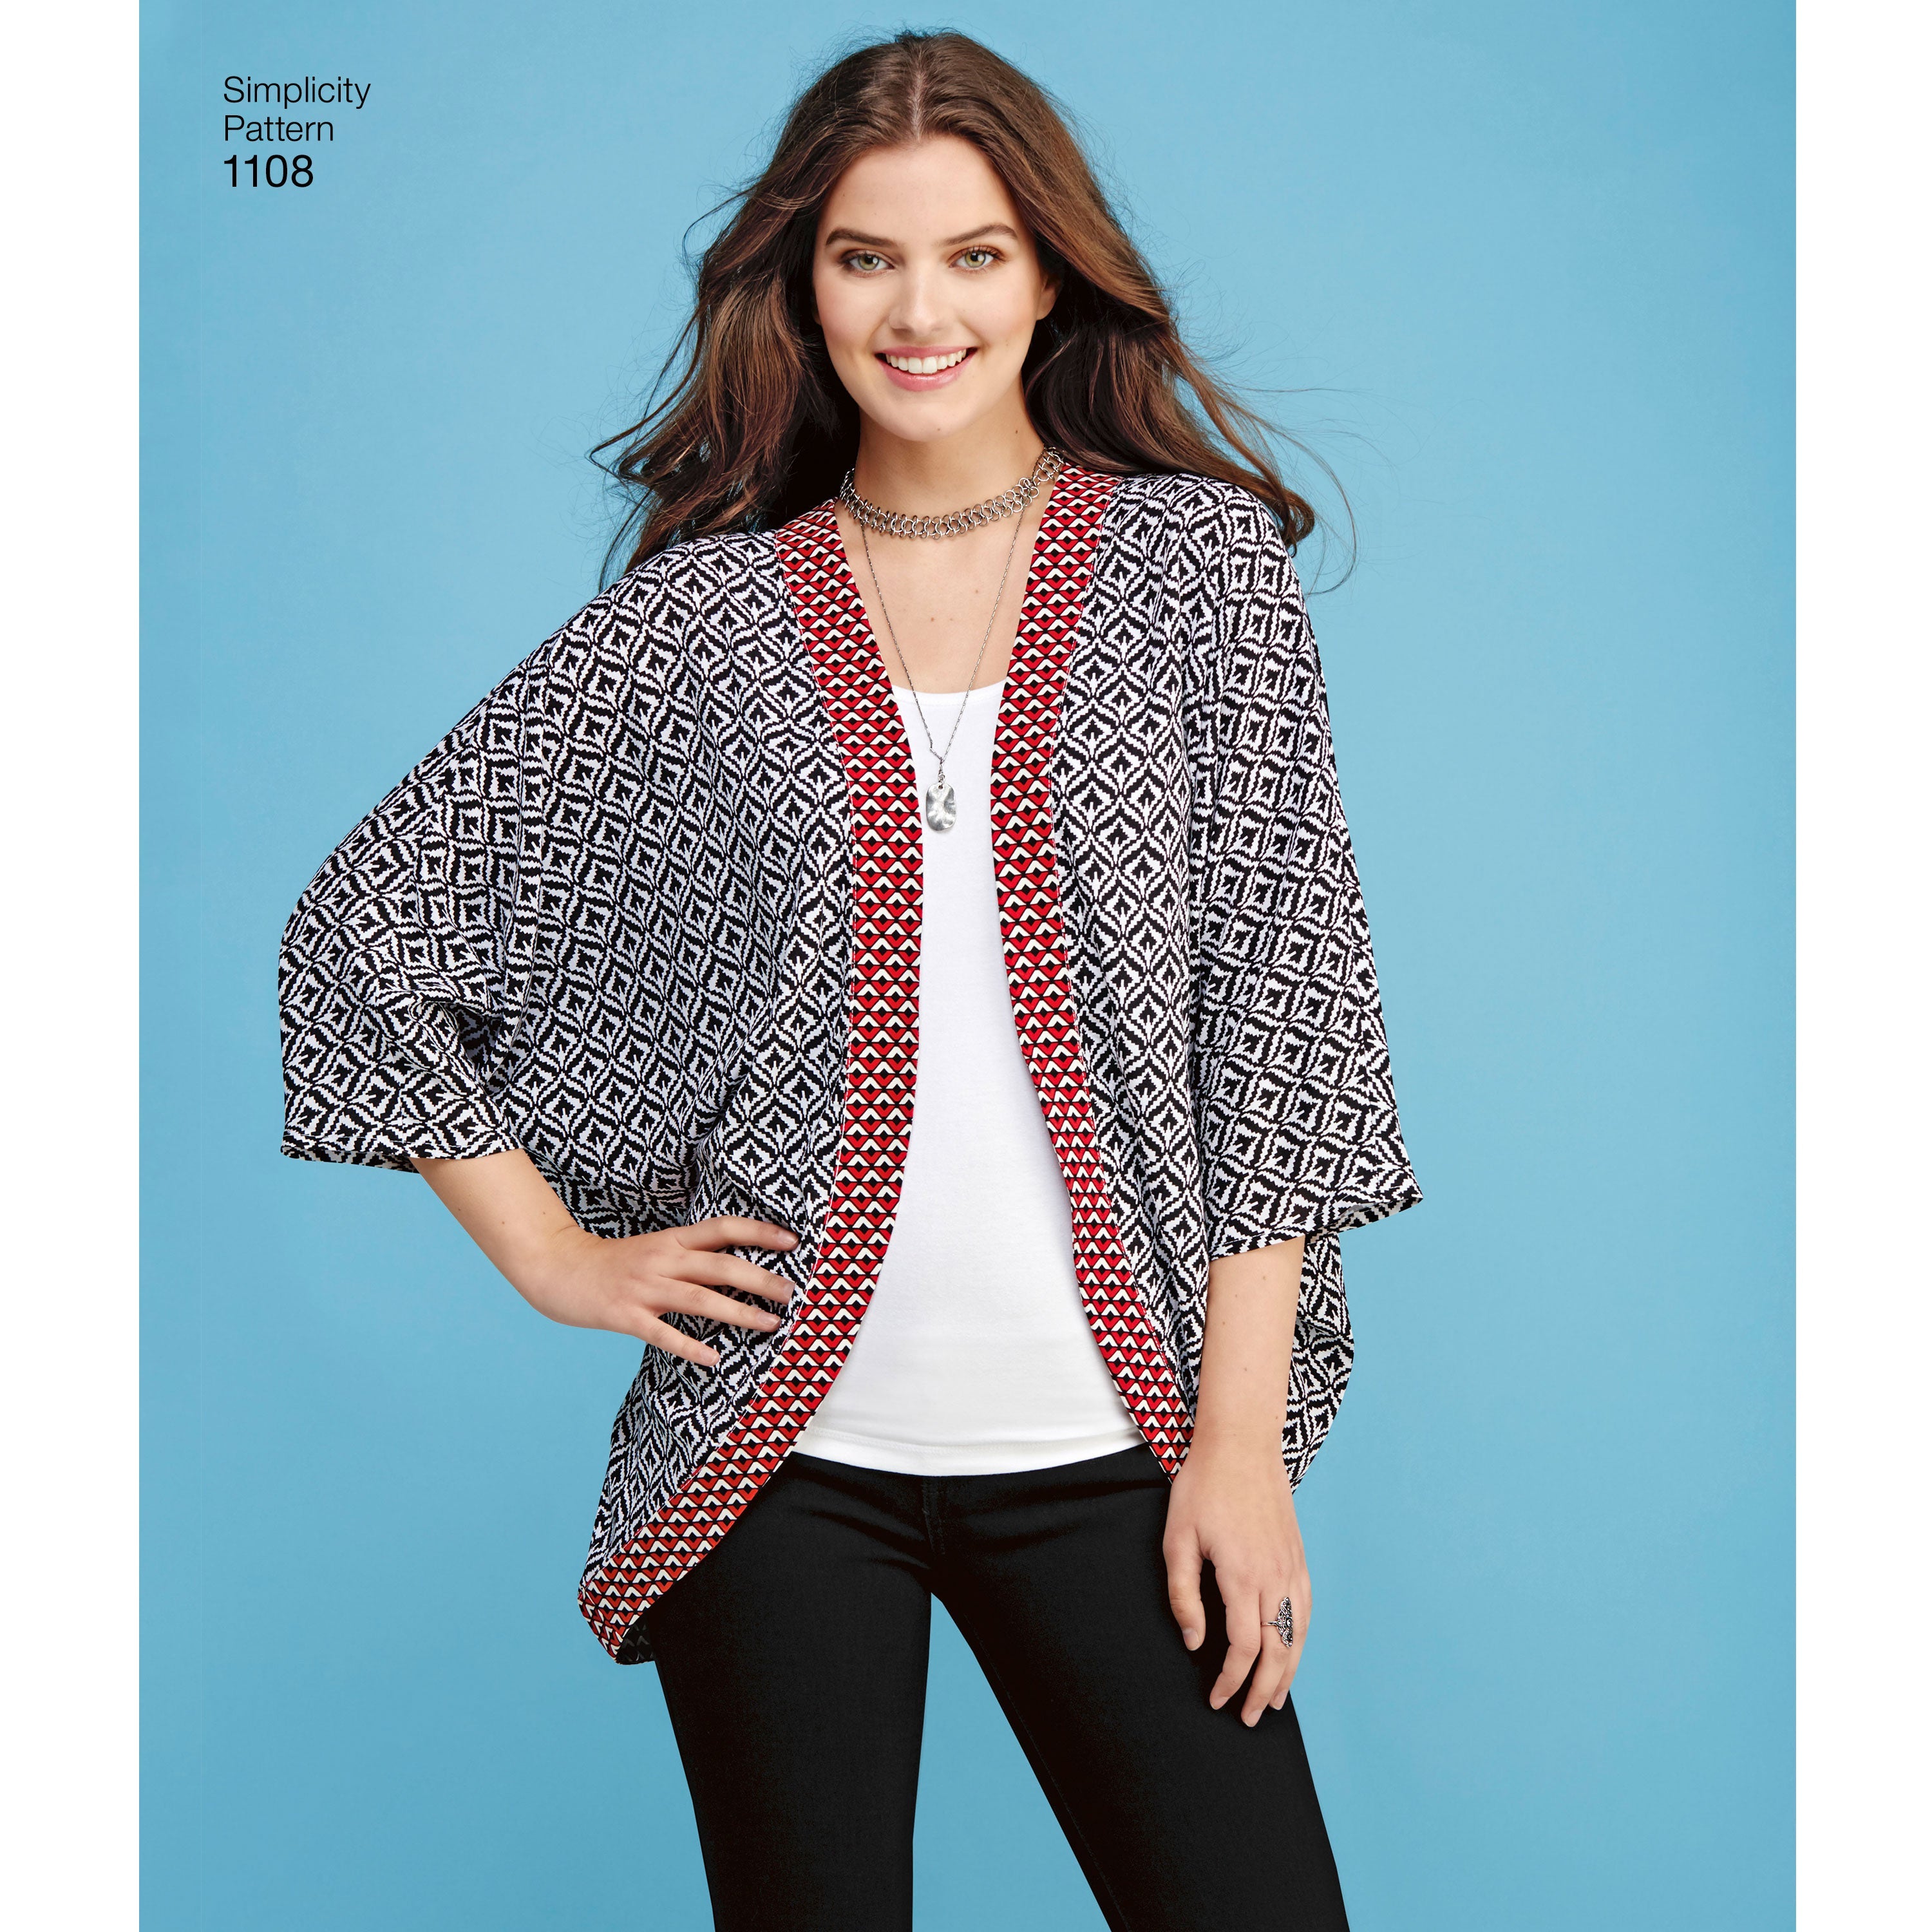 Simplicity Pattern 1108 Misses' Kimono's in Different Styles from Jaycotts Sewing Supplies